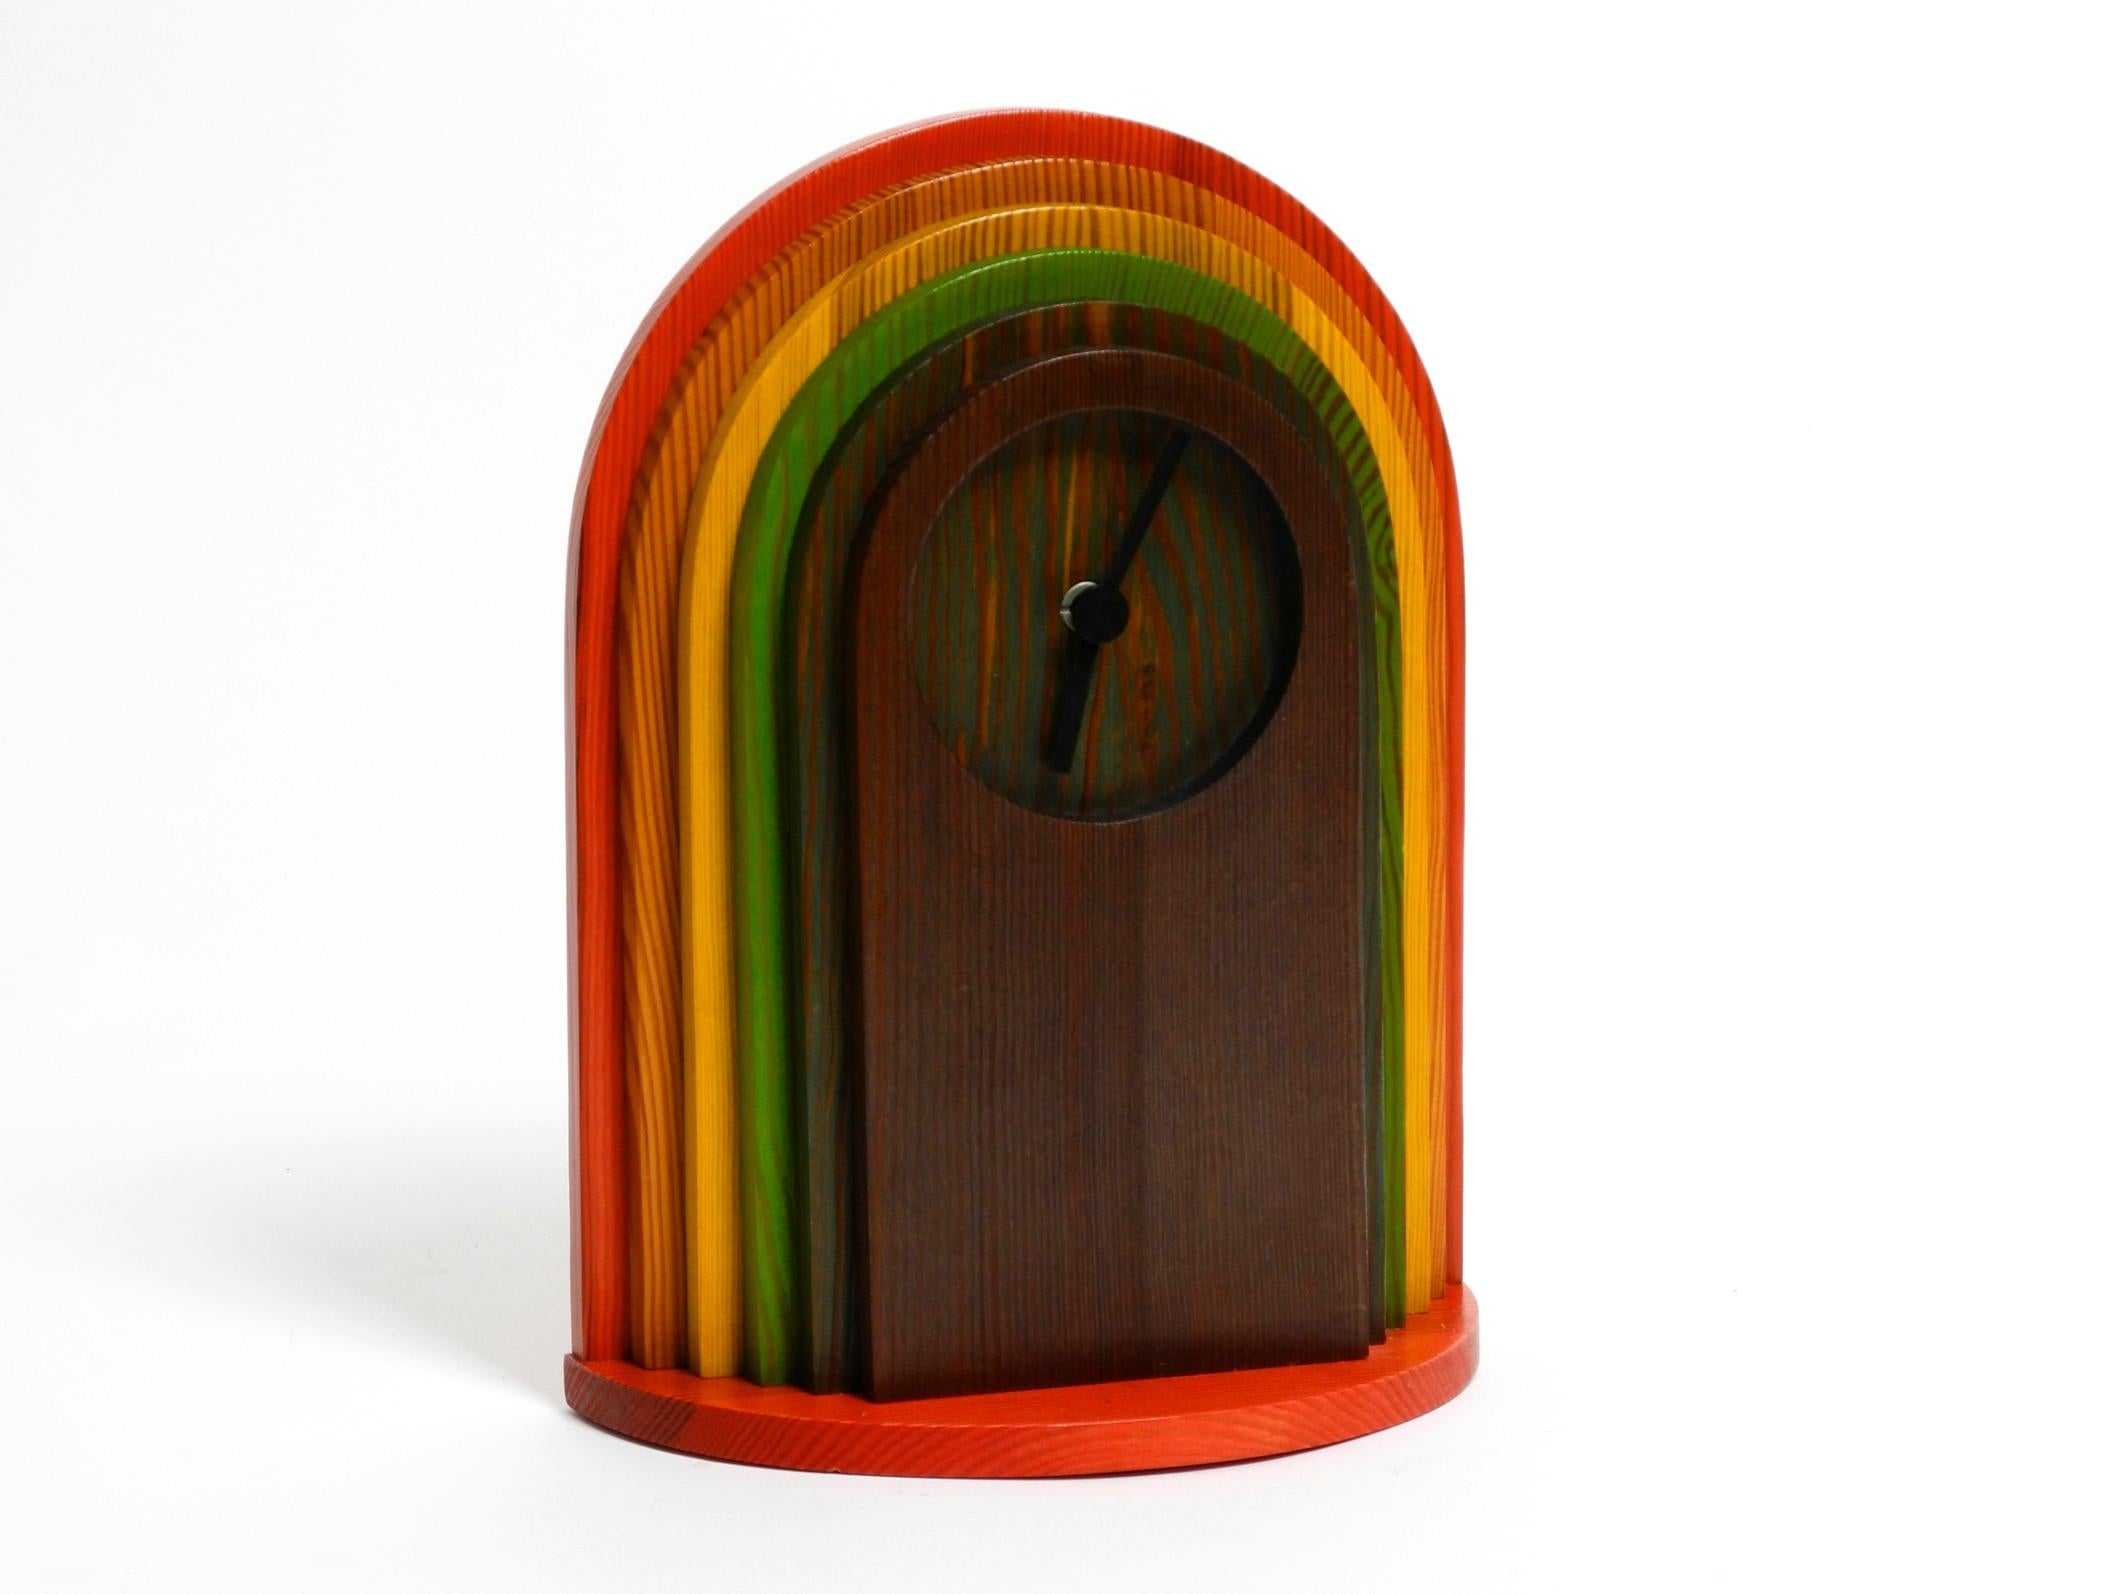 Beautiful 1980's colorful pine table clock.
Great minimalist postmodern design by Legnomagia. Made in Italy.
Made entirely by hand. With original label on the back.
Individual colorfully stained wooden elements are glued together.
With battery